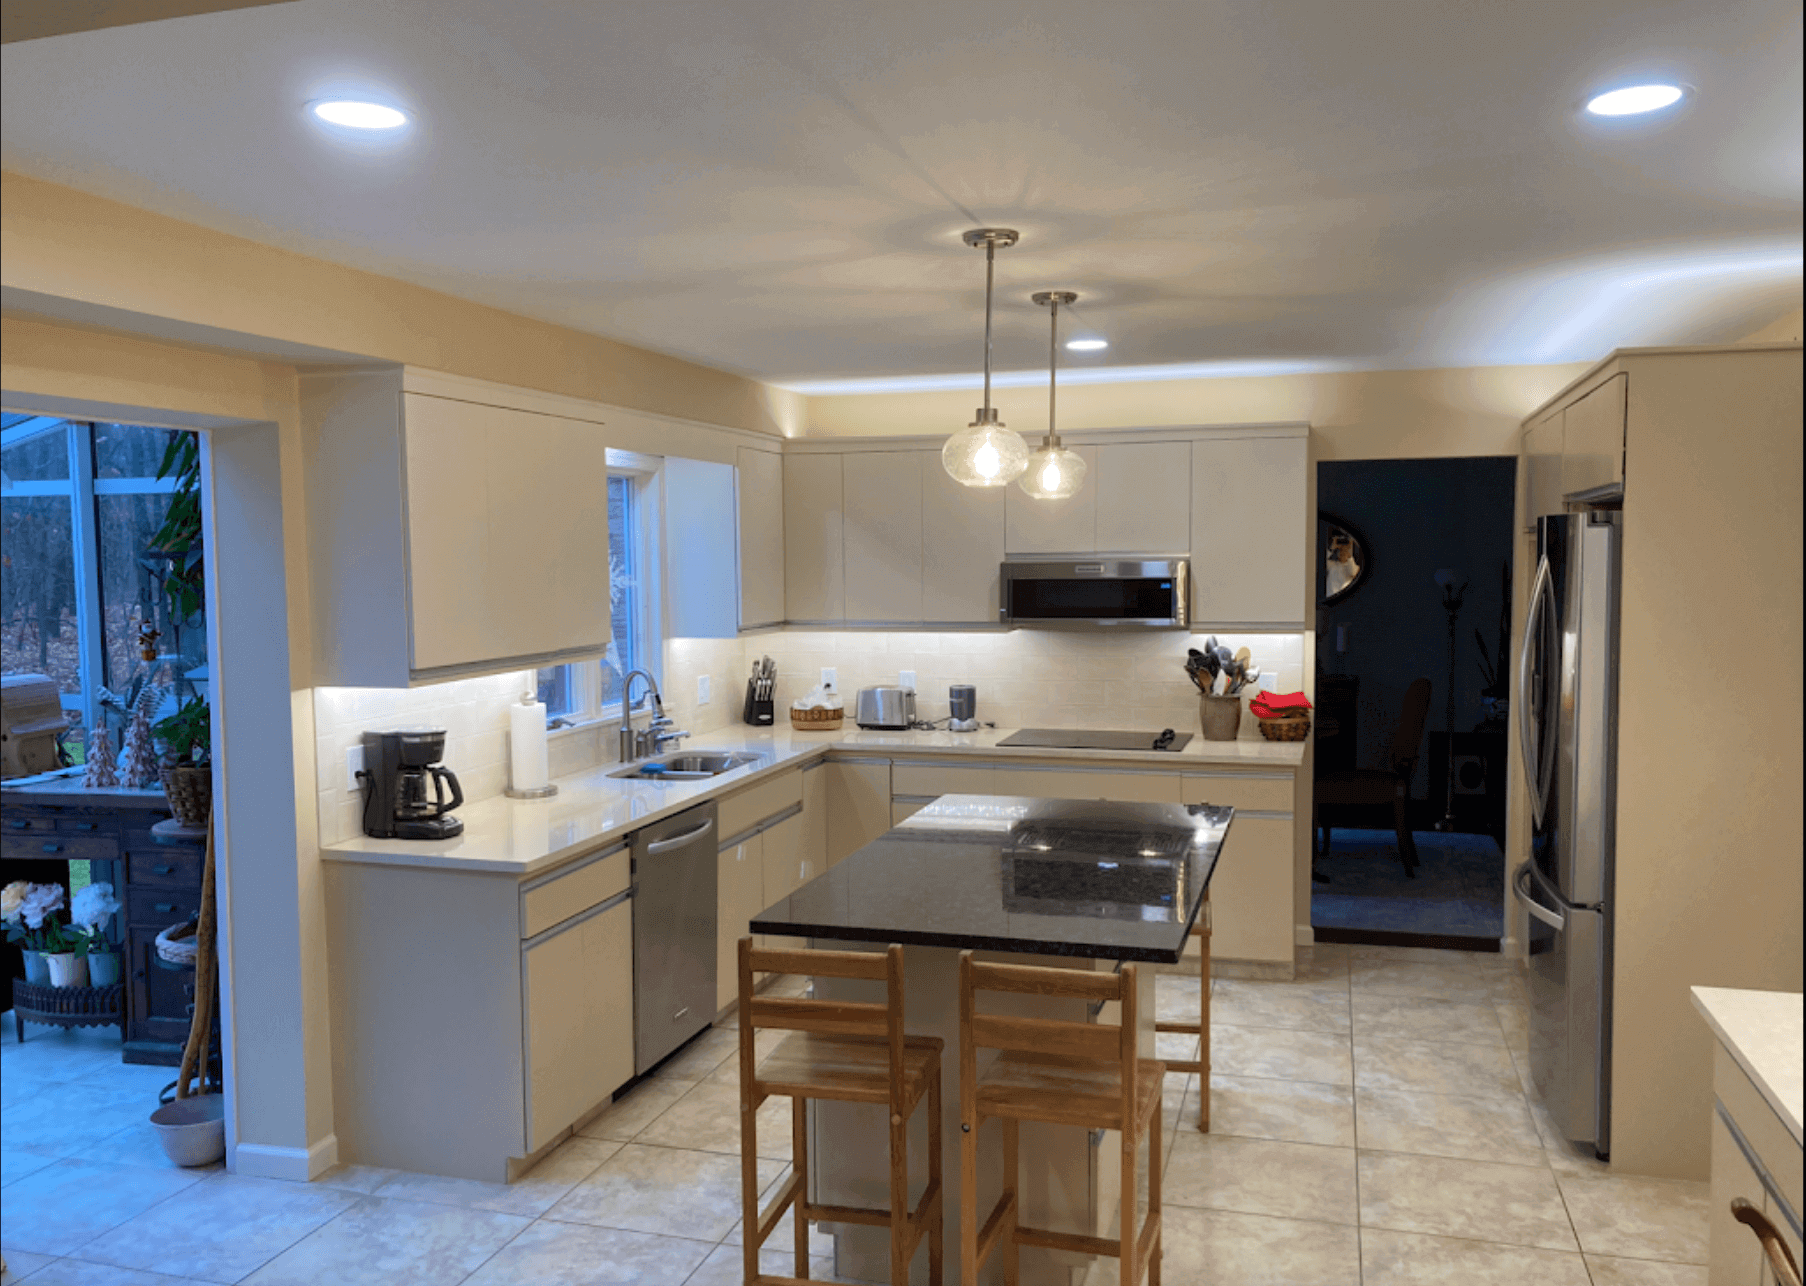 Top 5 Budget-Friendly Kitchen Remodeling Tips for Homeowners